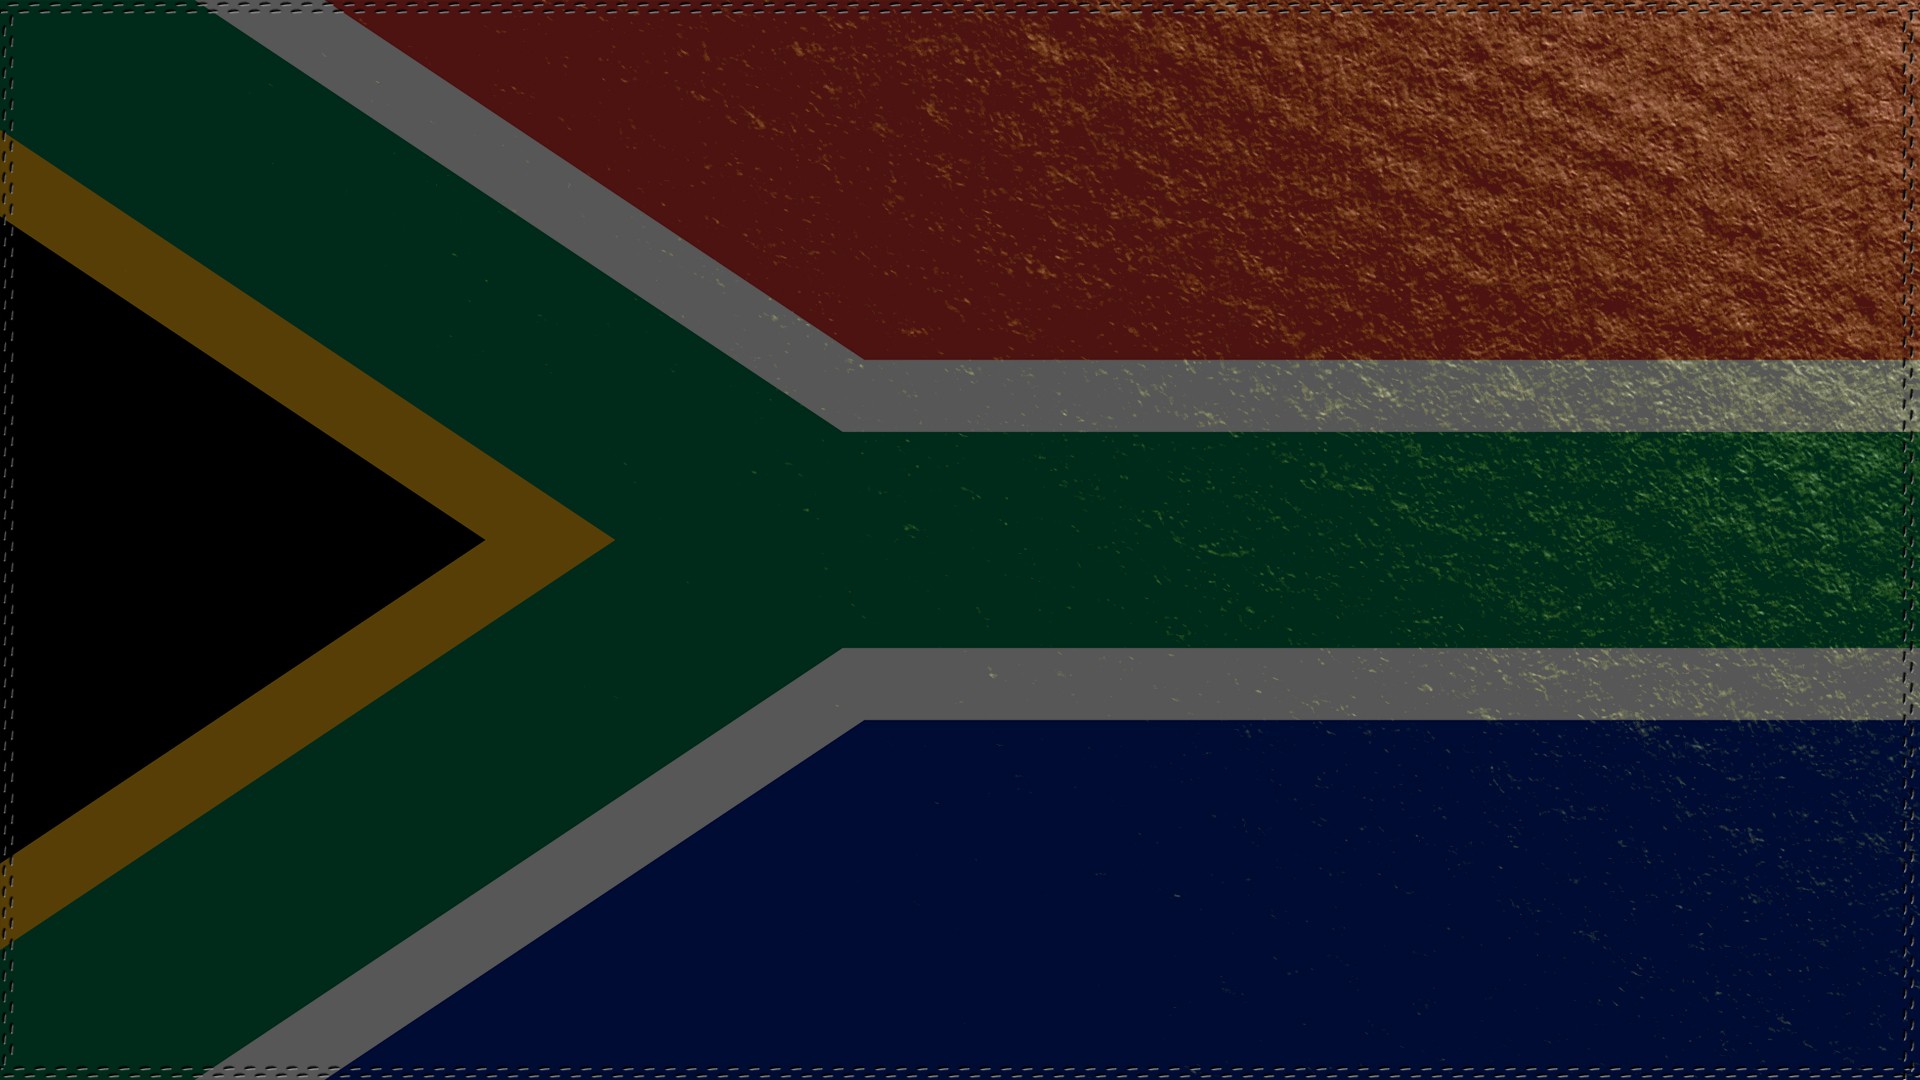 General 1920x1080 flag South Africa red green blue countries